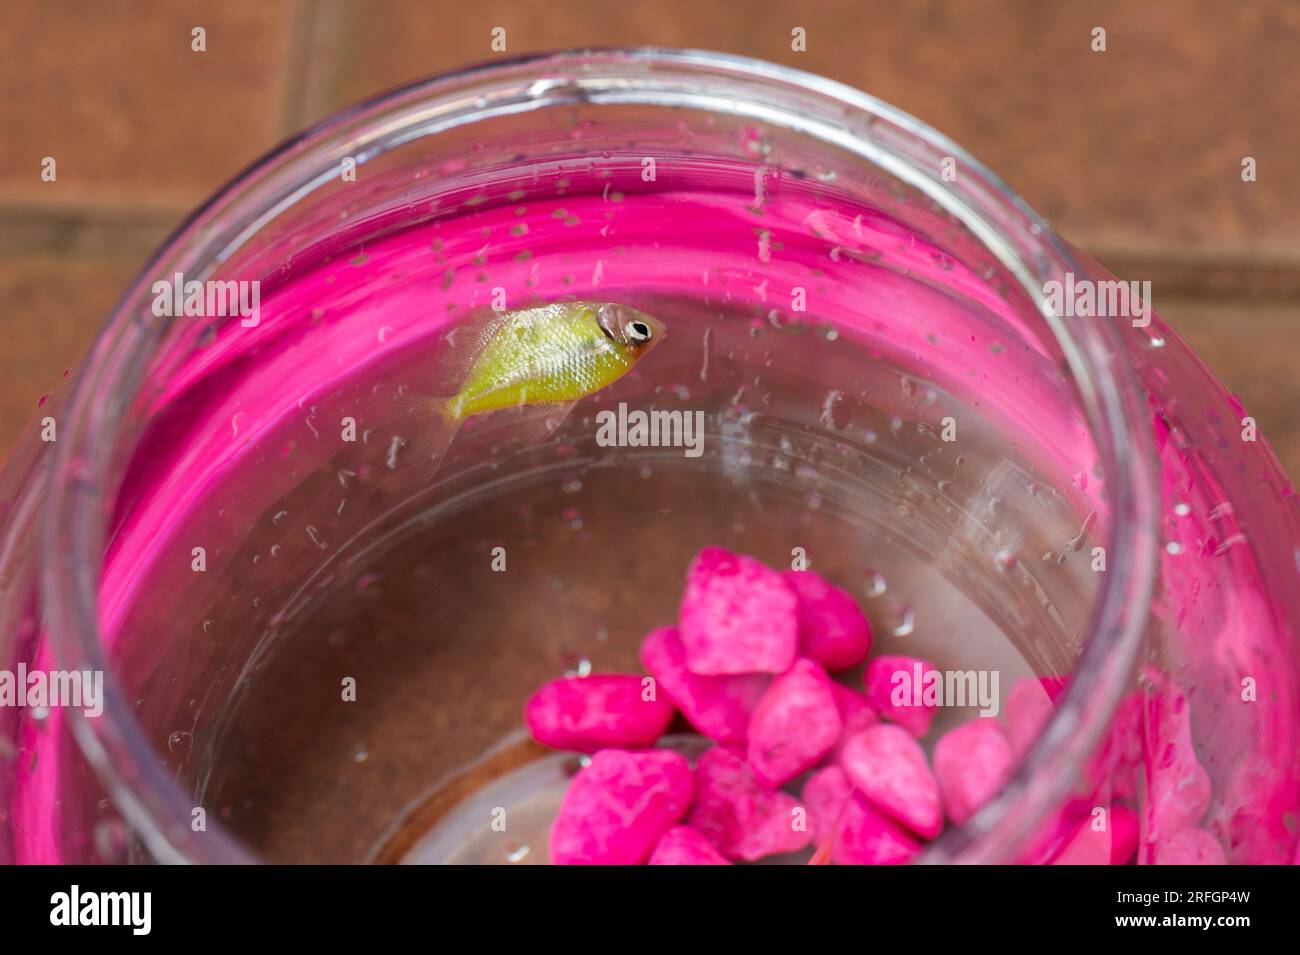 Dead fish floating in empty aquarium with pink stones Stock Photo